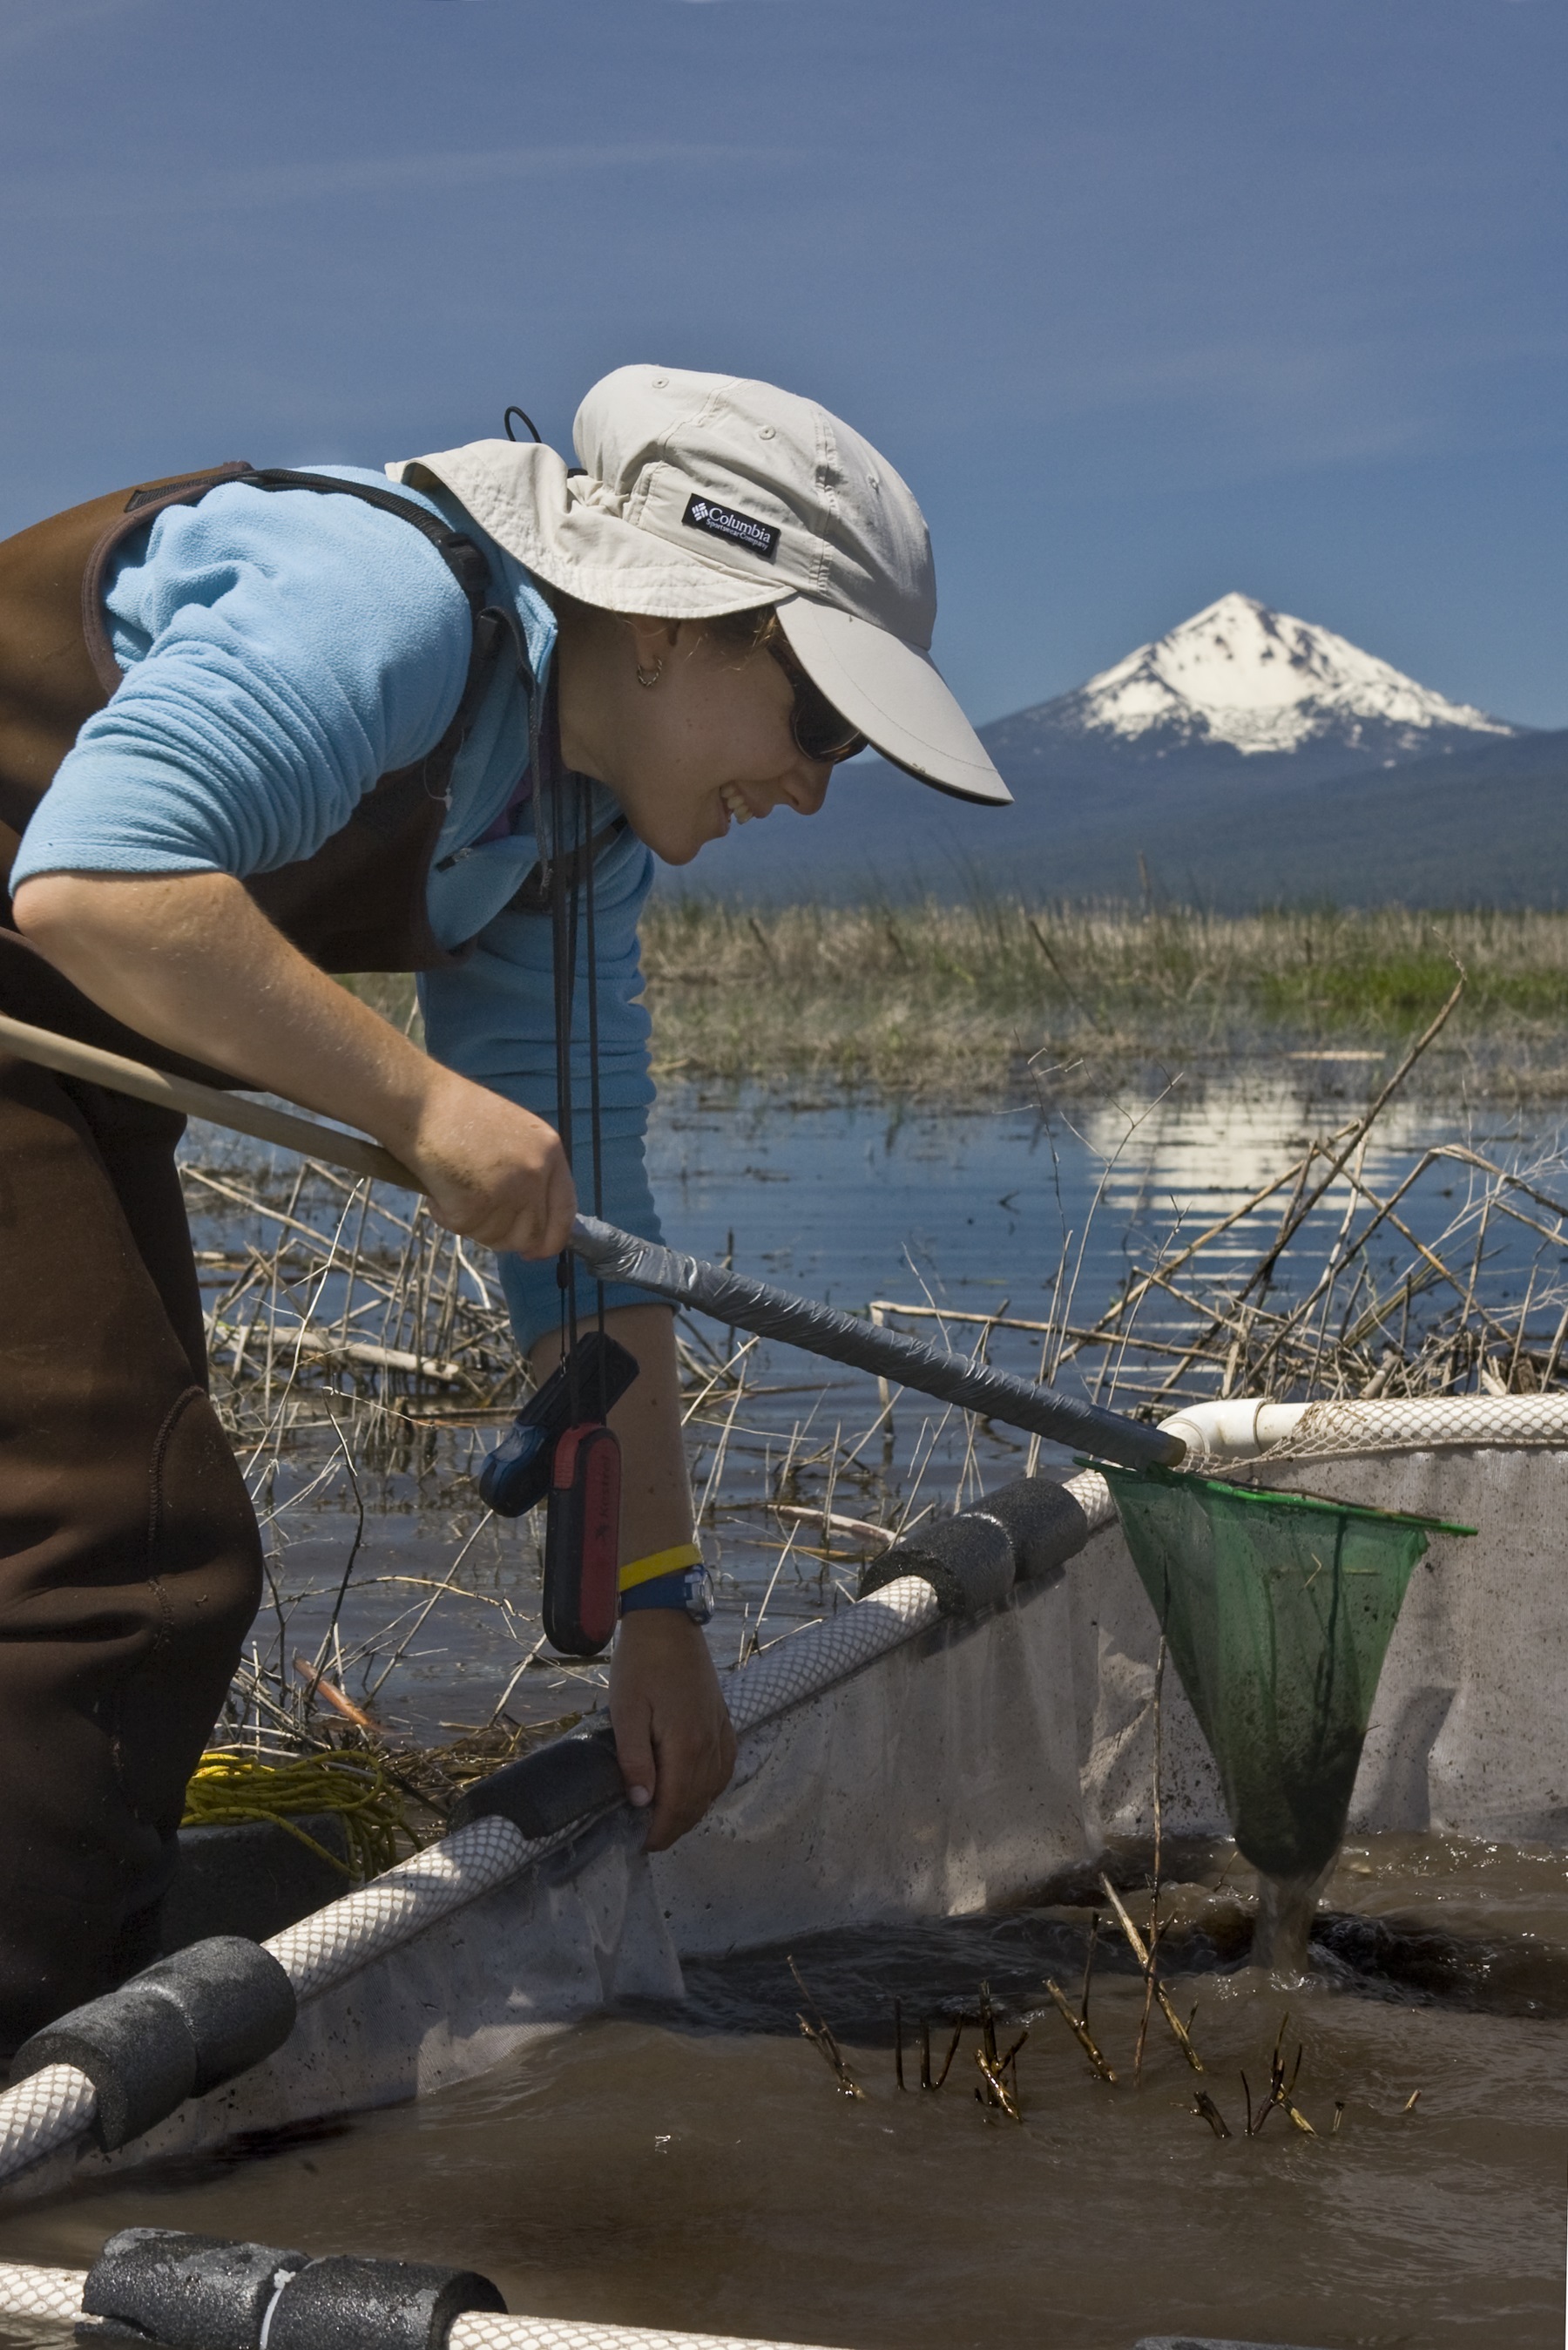 Volunteer with waders and a sun hat working with a pvc net in a shallow wetland at Williamson River Delta near Klamath Falls with a snowcapped mountain in the background.  